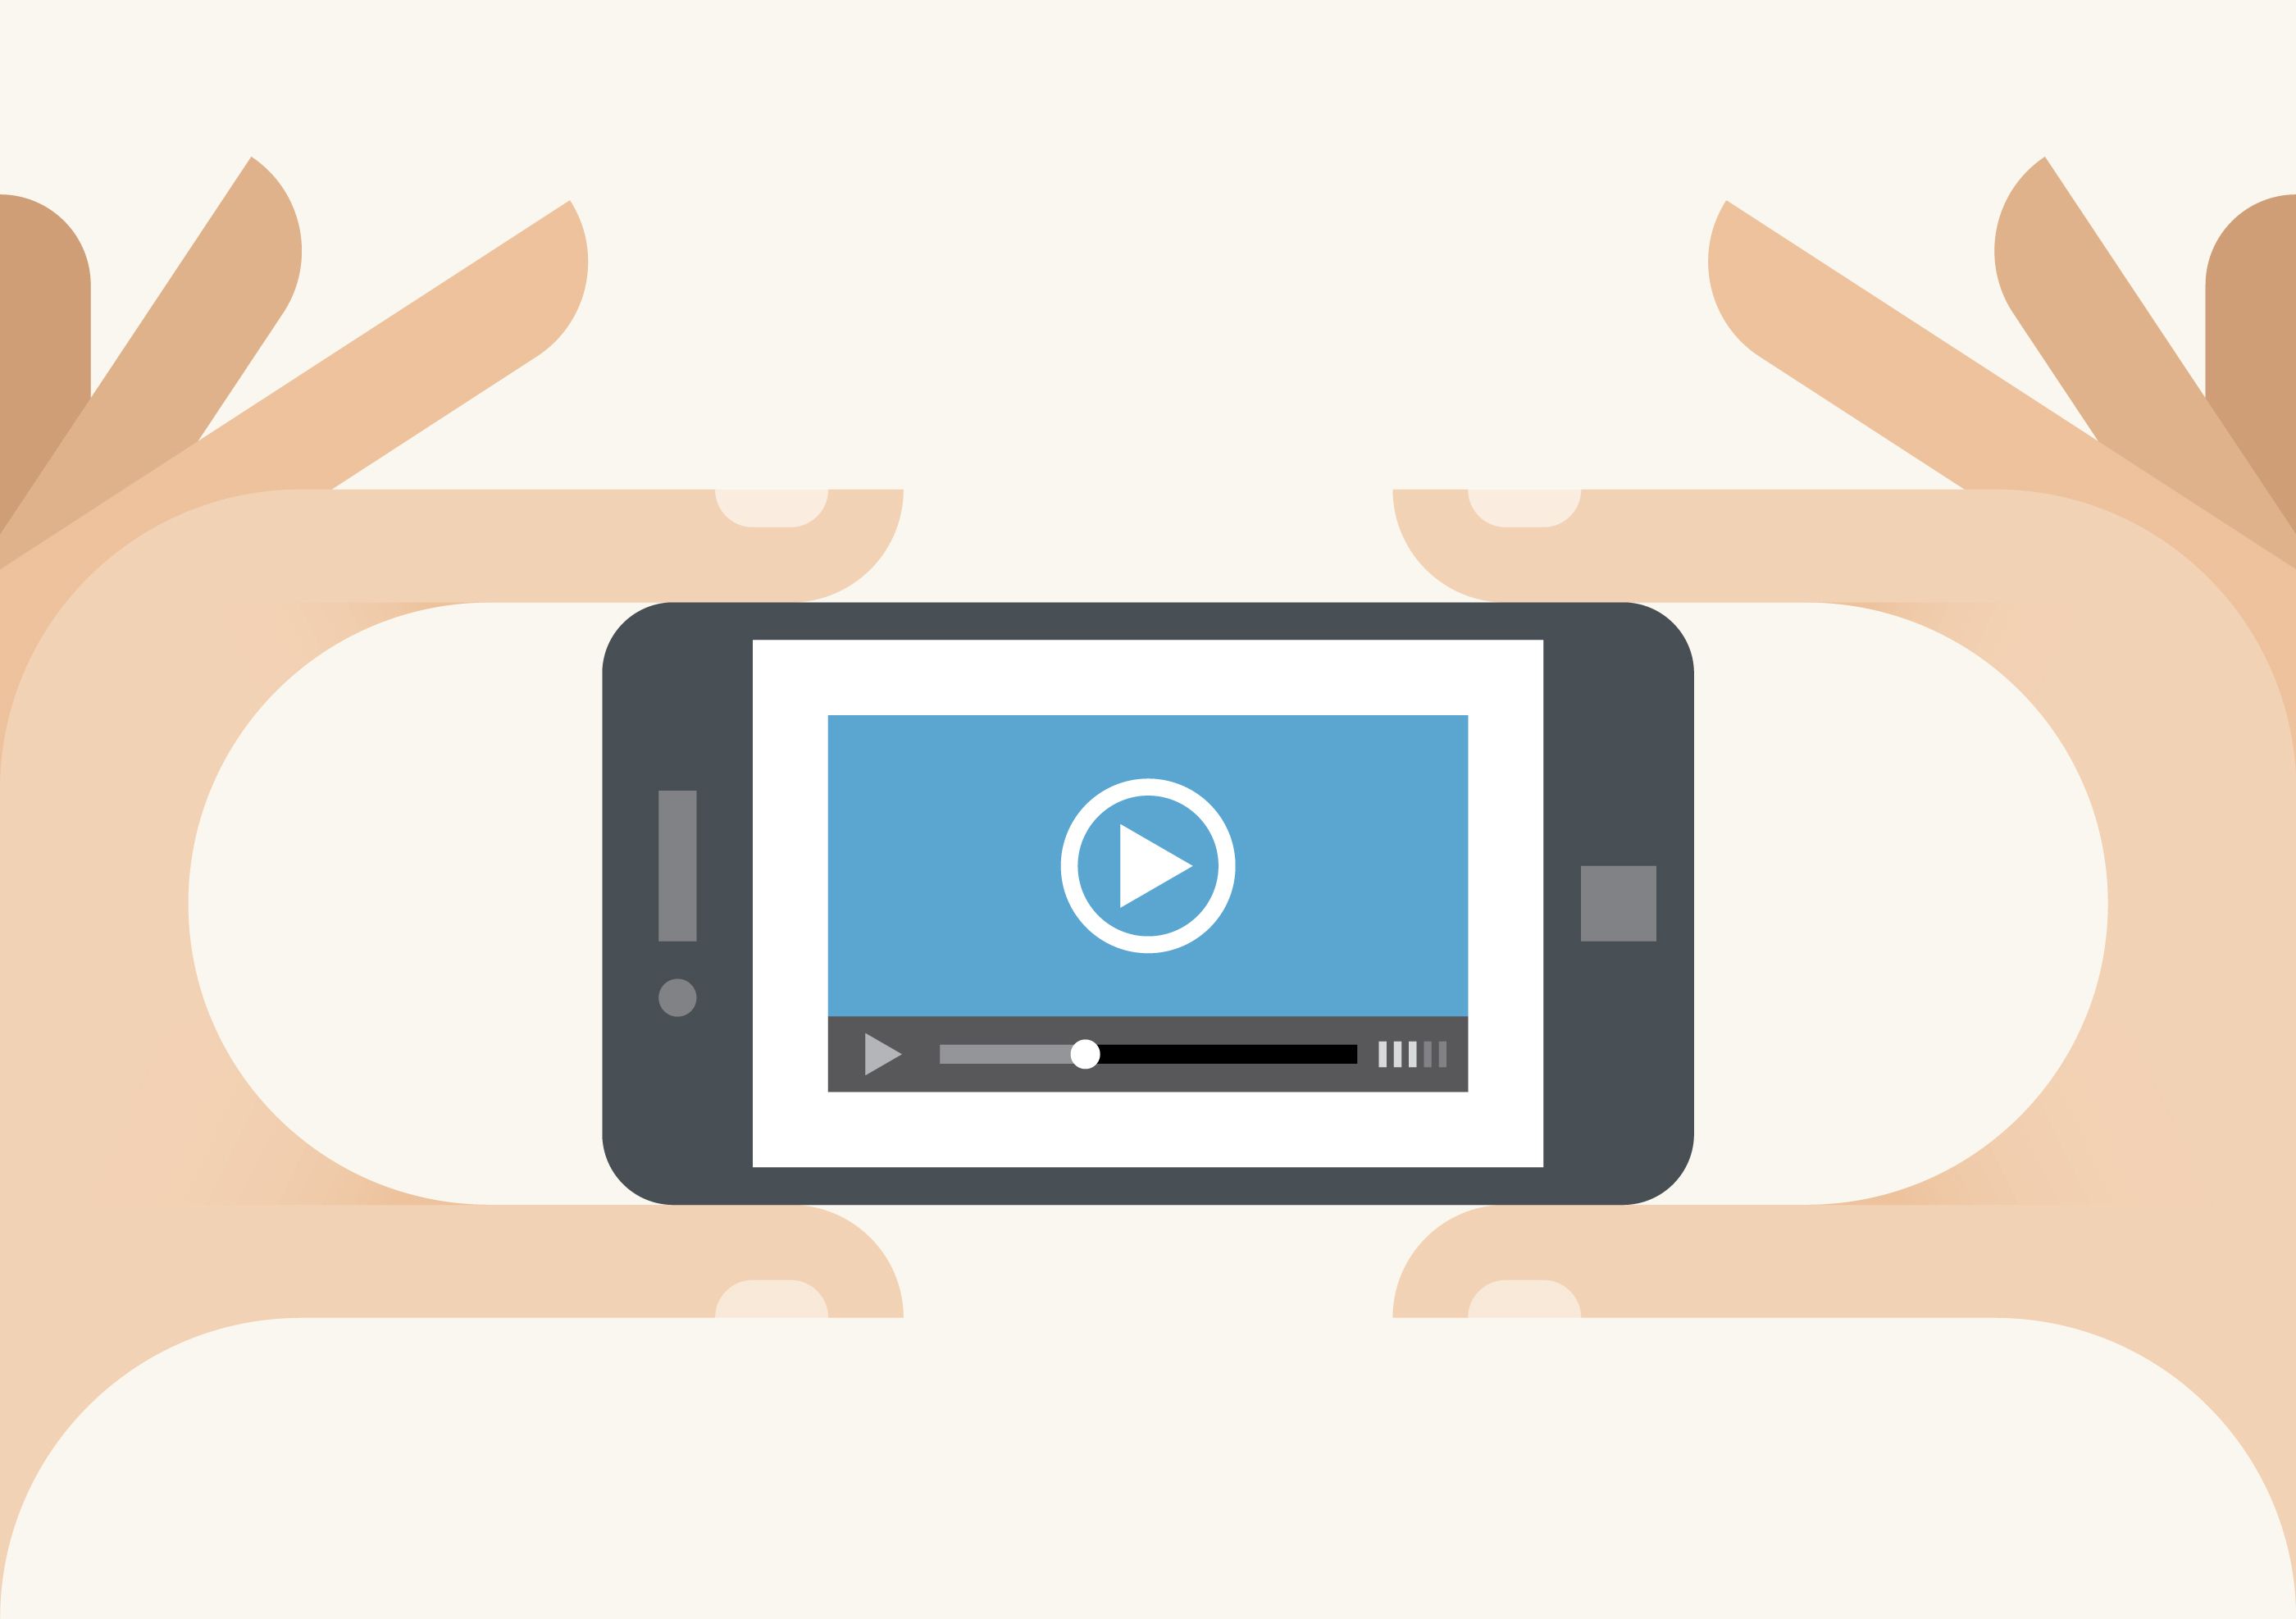 video-content-the-importance-of-video-marketing.jpg (2800Ã1974)